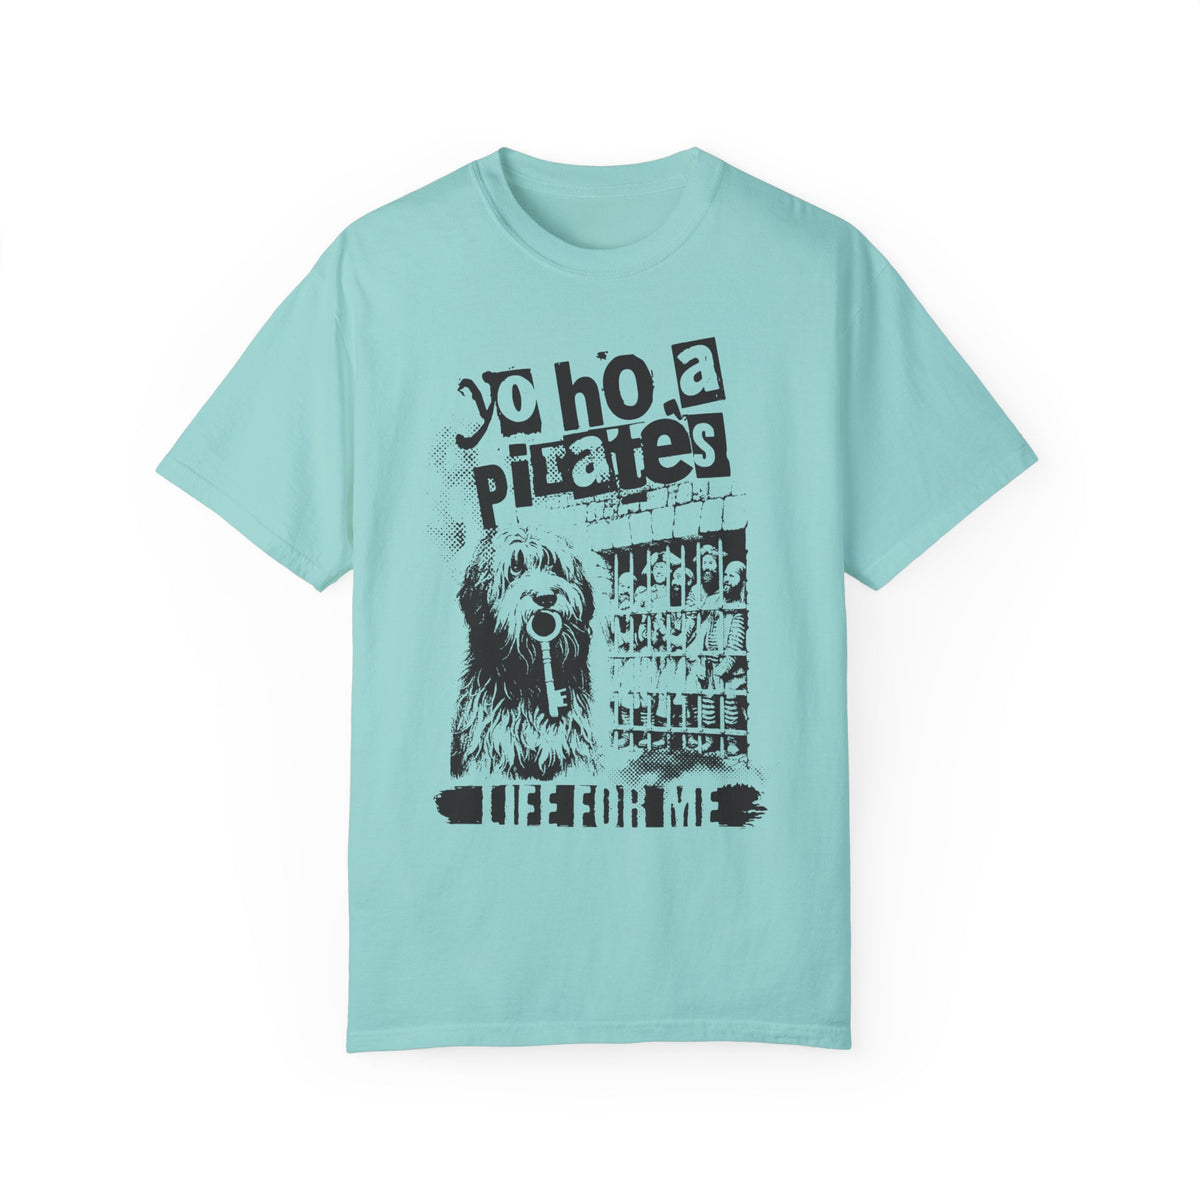 Yo Ho A Pirate's Life For Me Comfort Colors Unisex Garment-Dyed T-shirt